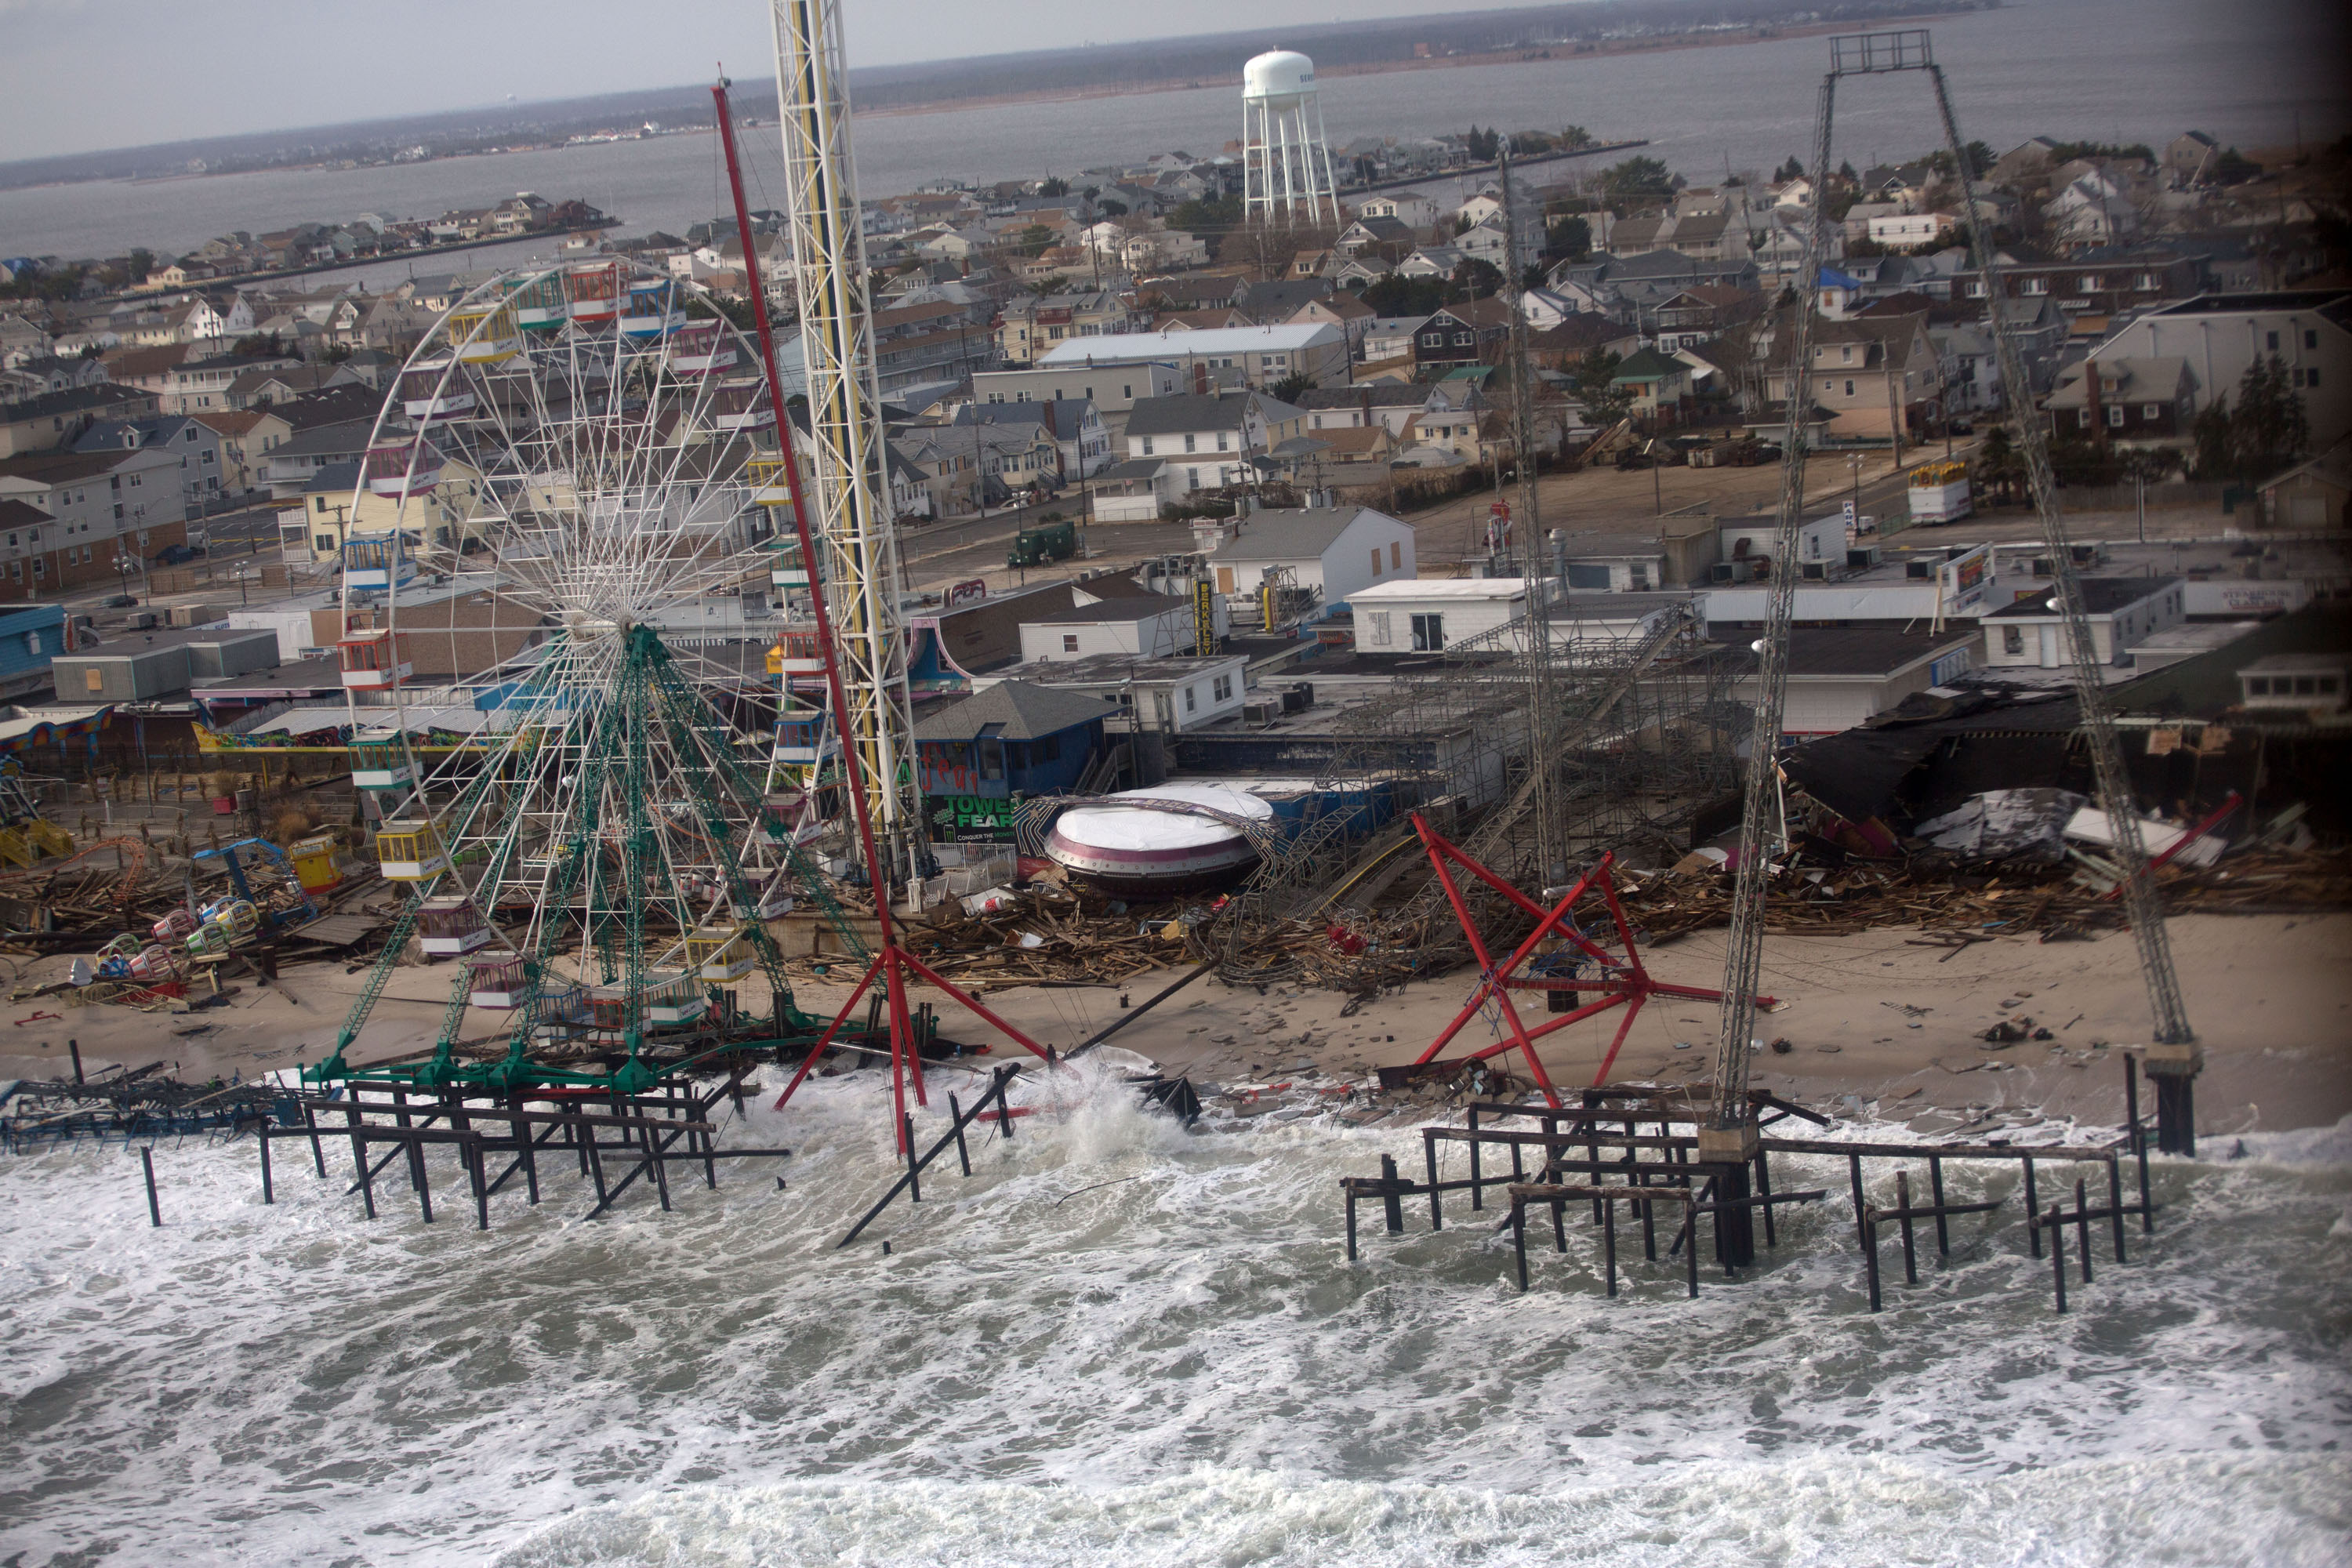 The view from aerial tour of Hurricane Sandy damage  of New Jersey's barrier beaches